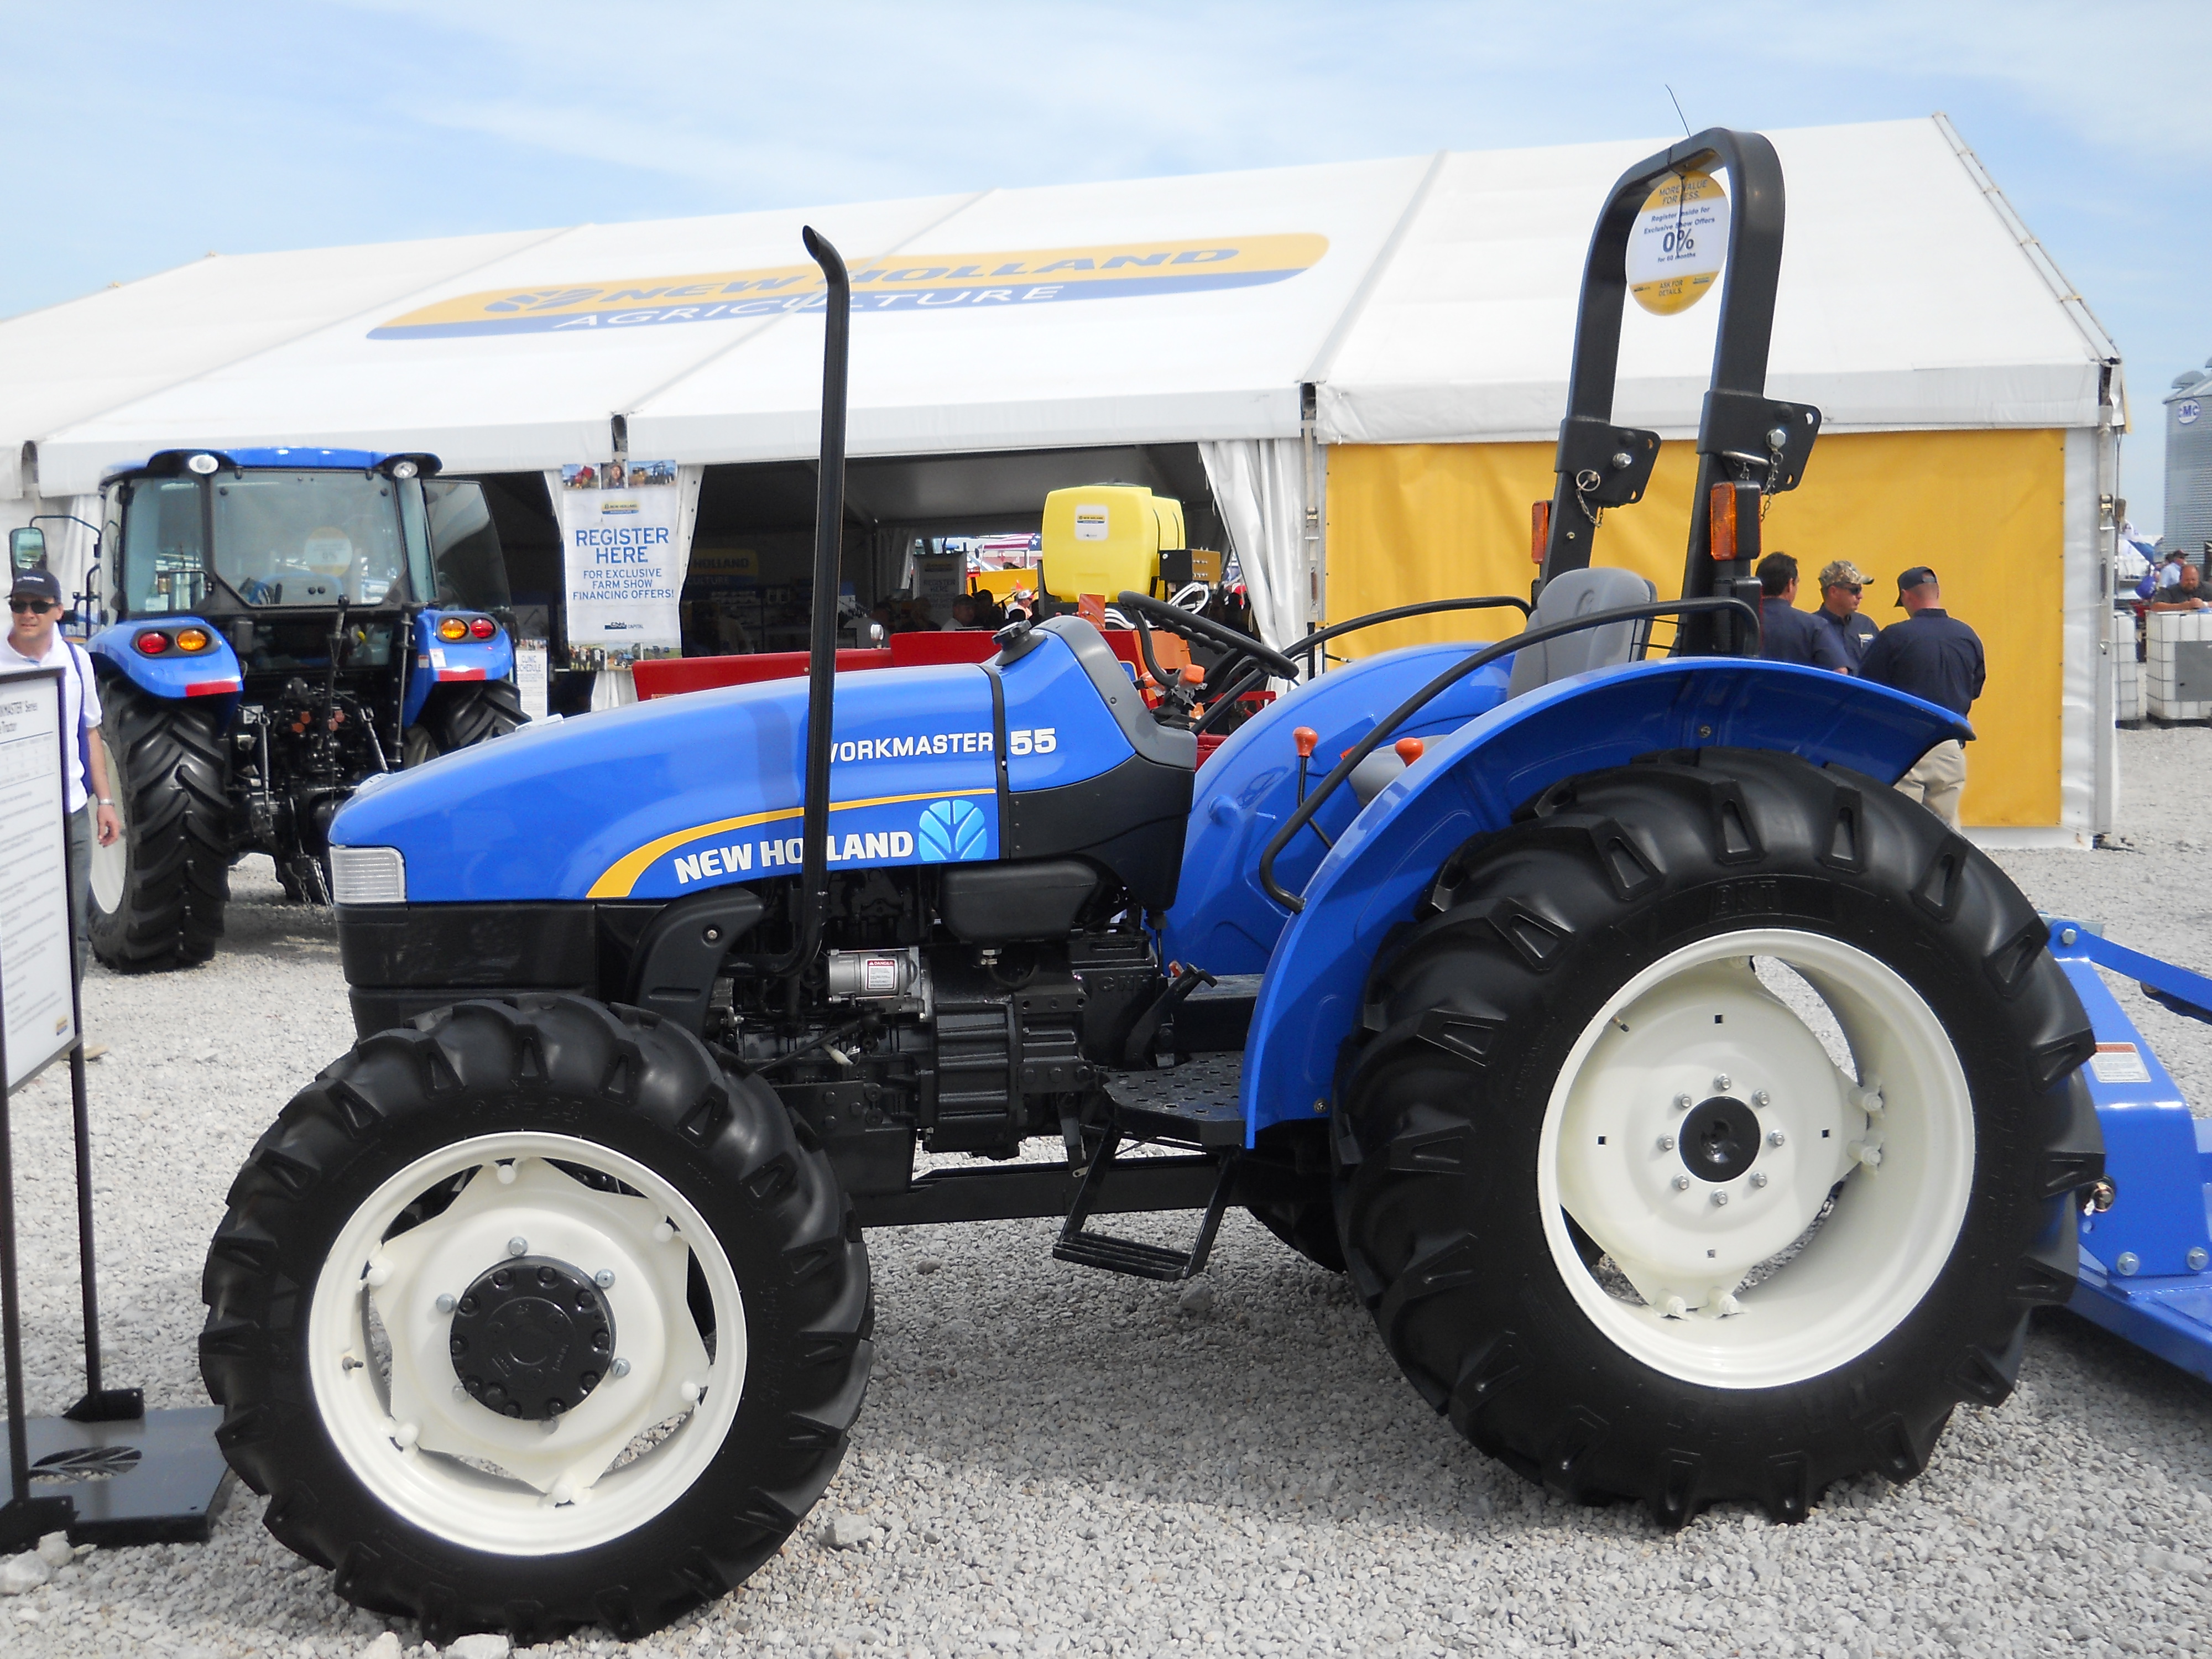 New Holland Workmaster 55 - Tractor & Construction Plant Wiki - The ...